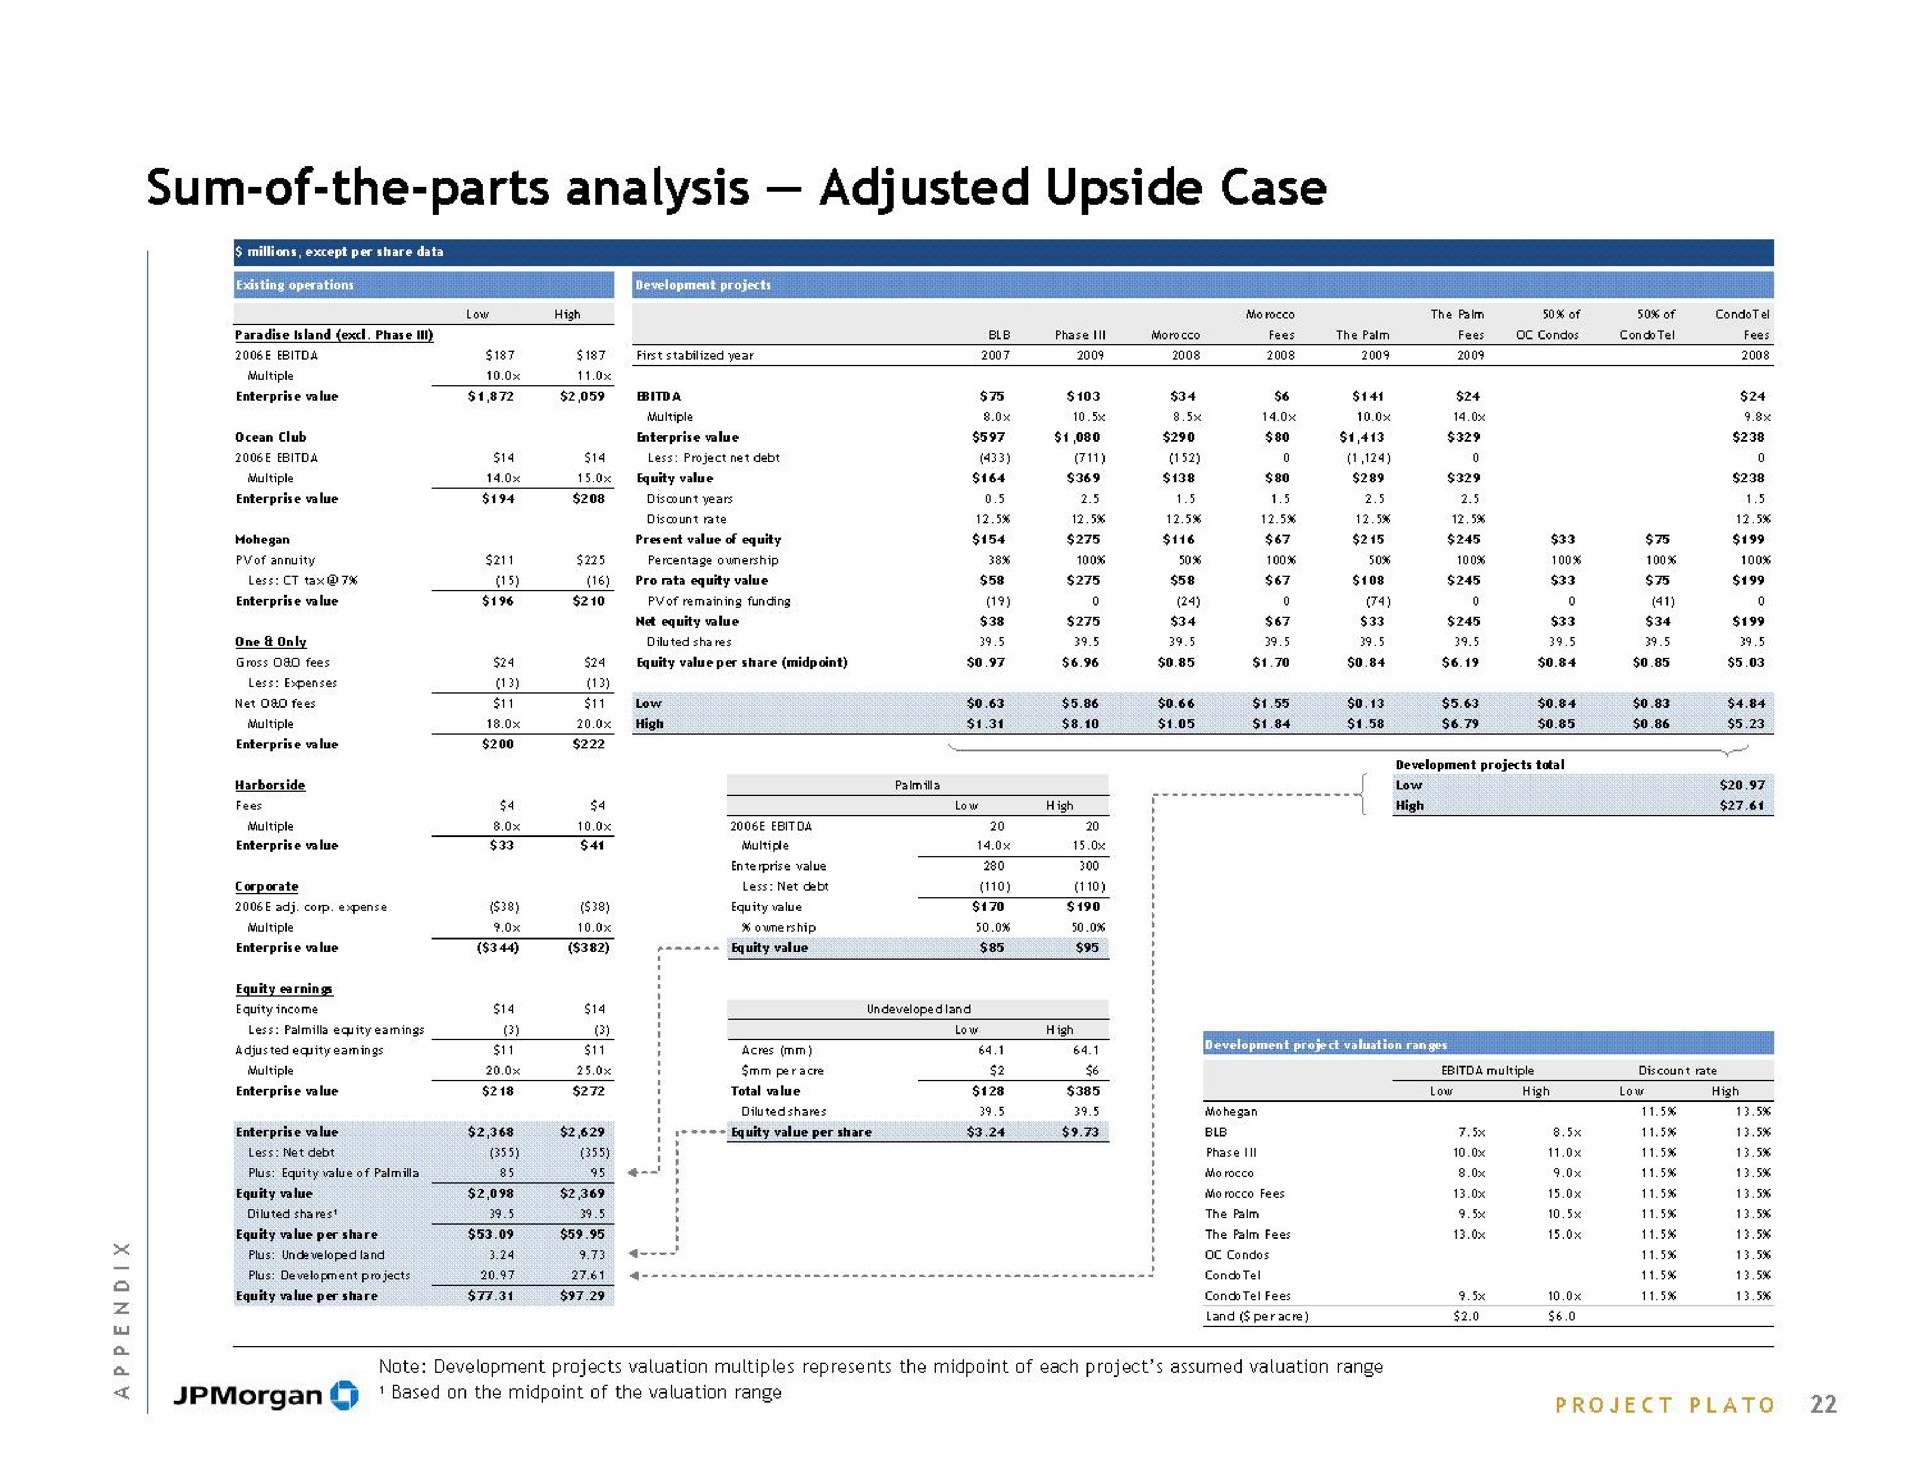 sum of the parts analysis adjusted upside case | J.P.Morgan